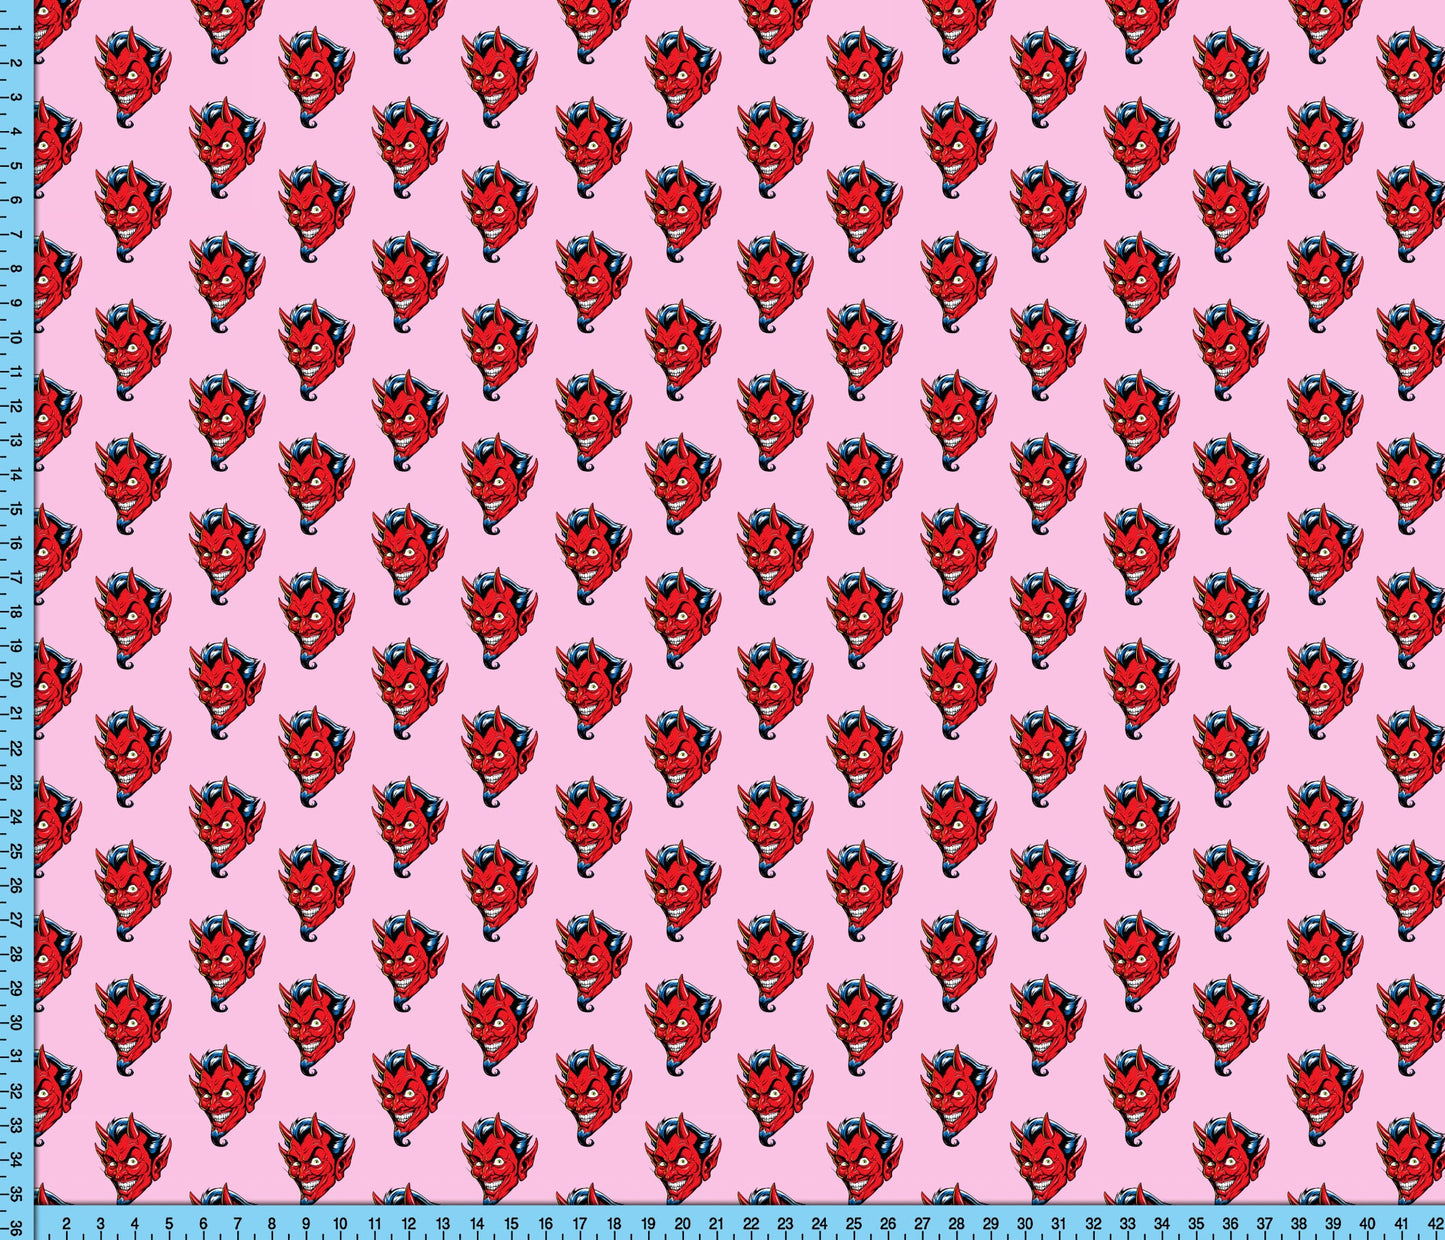 Red Devil on Pink Fabric, Novelty Design Printed By the Yard for Crafts, Shirts, Masks